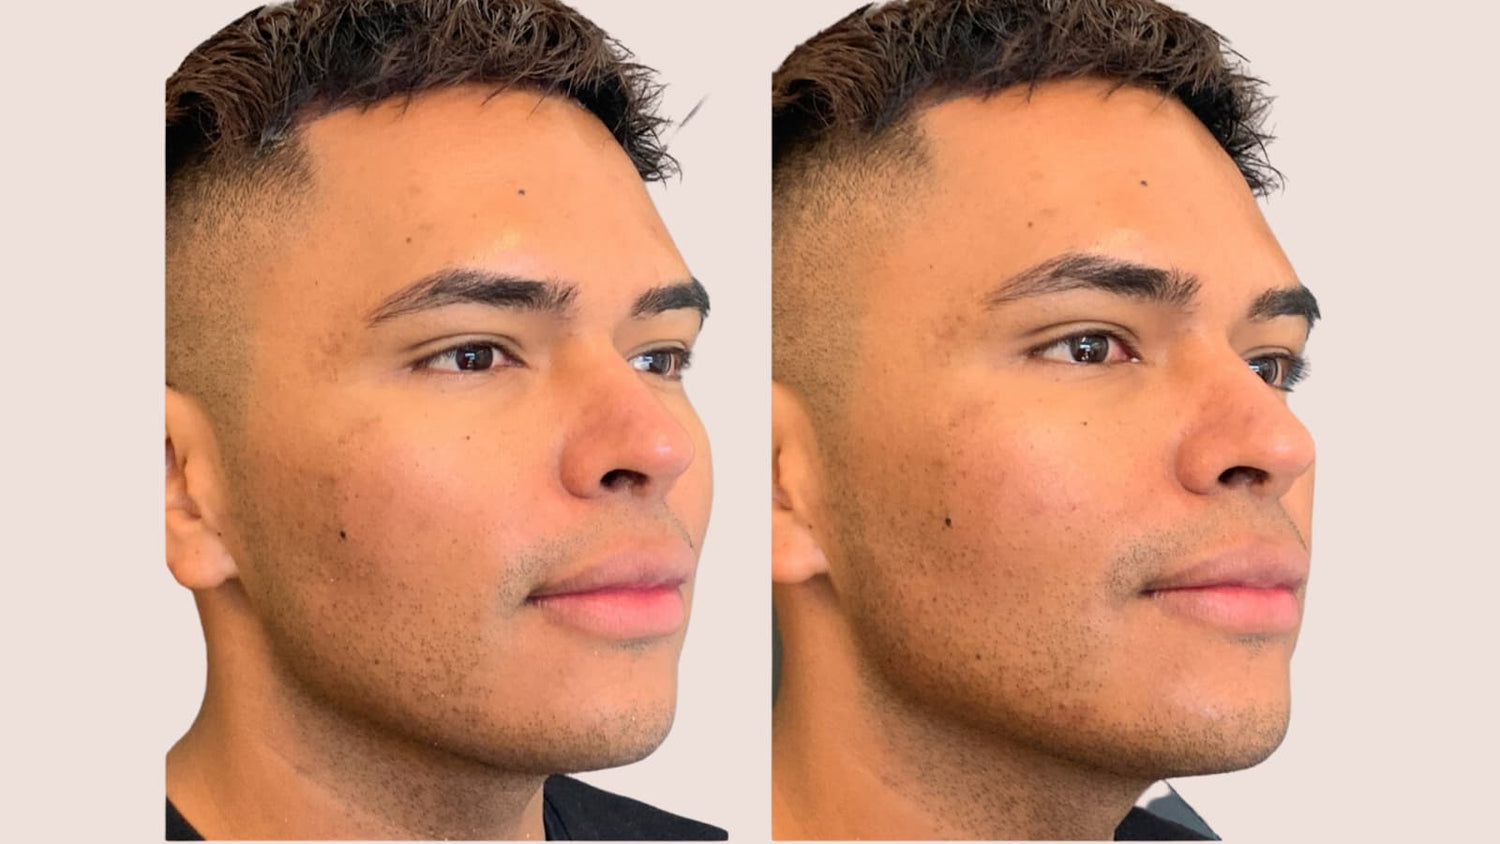 Jawline and Chin Filler Transformation